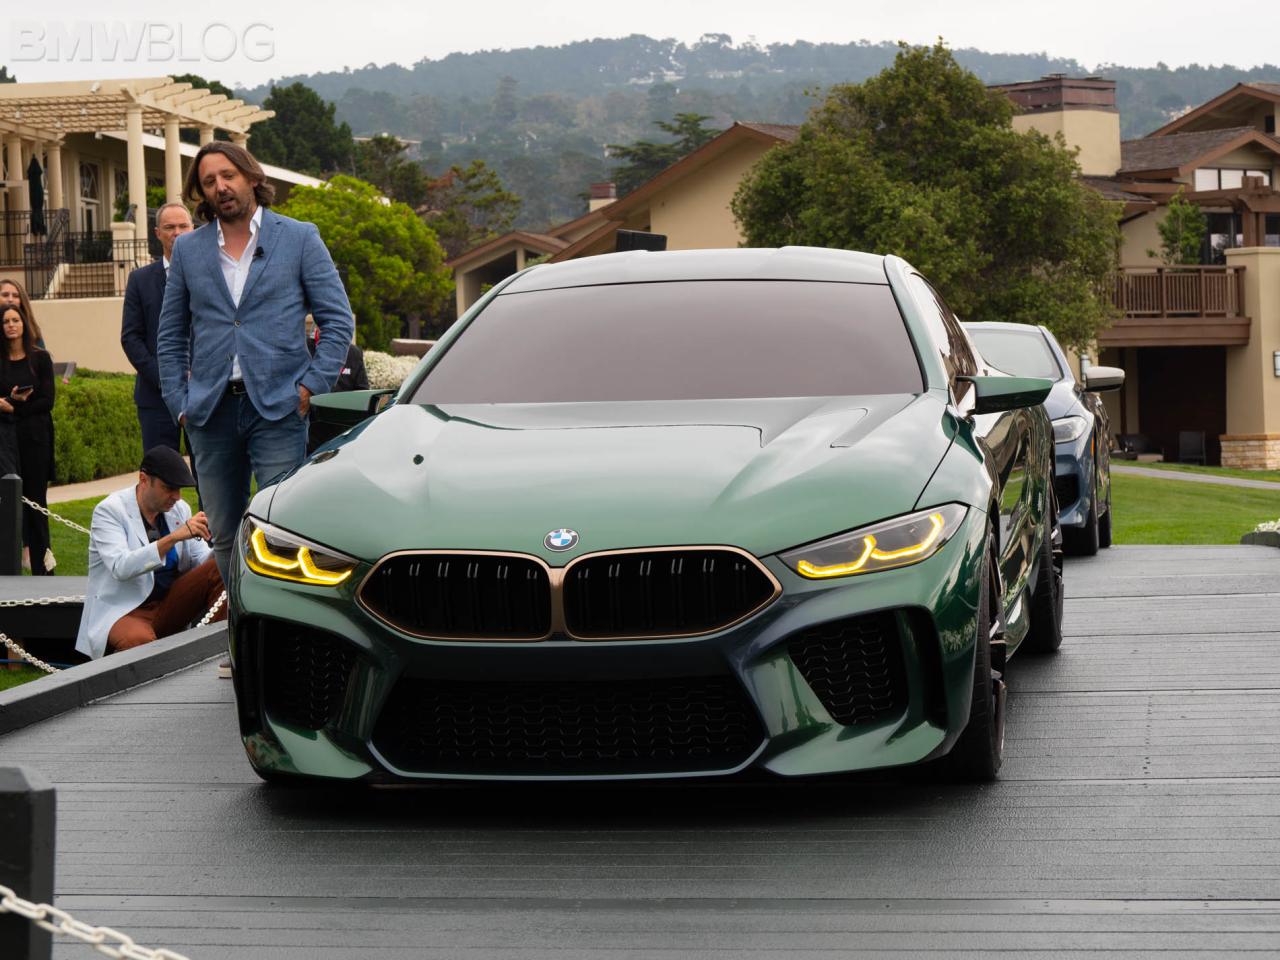 A Stylish And Sporty Ride: The 2018 BMW M8 Gran Coupe Concept